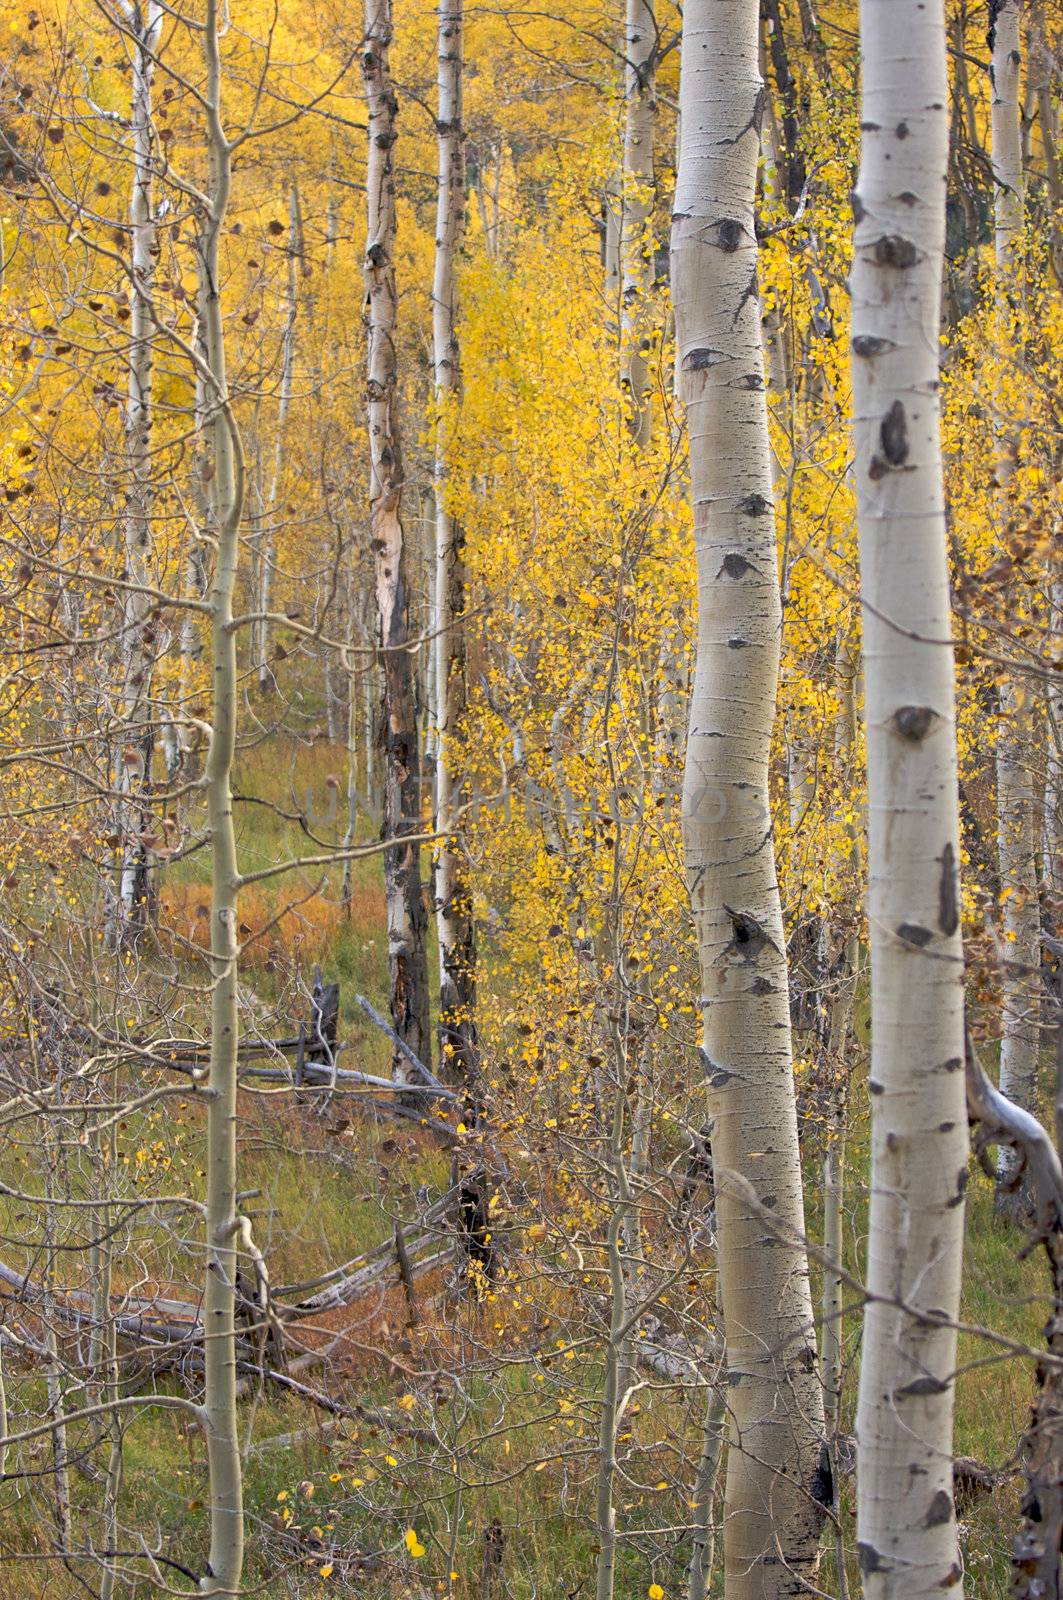 Aspen Pines Changing Color by Feverpitched